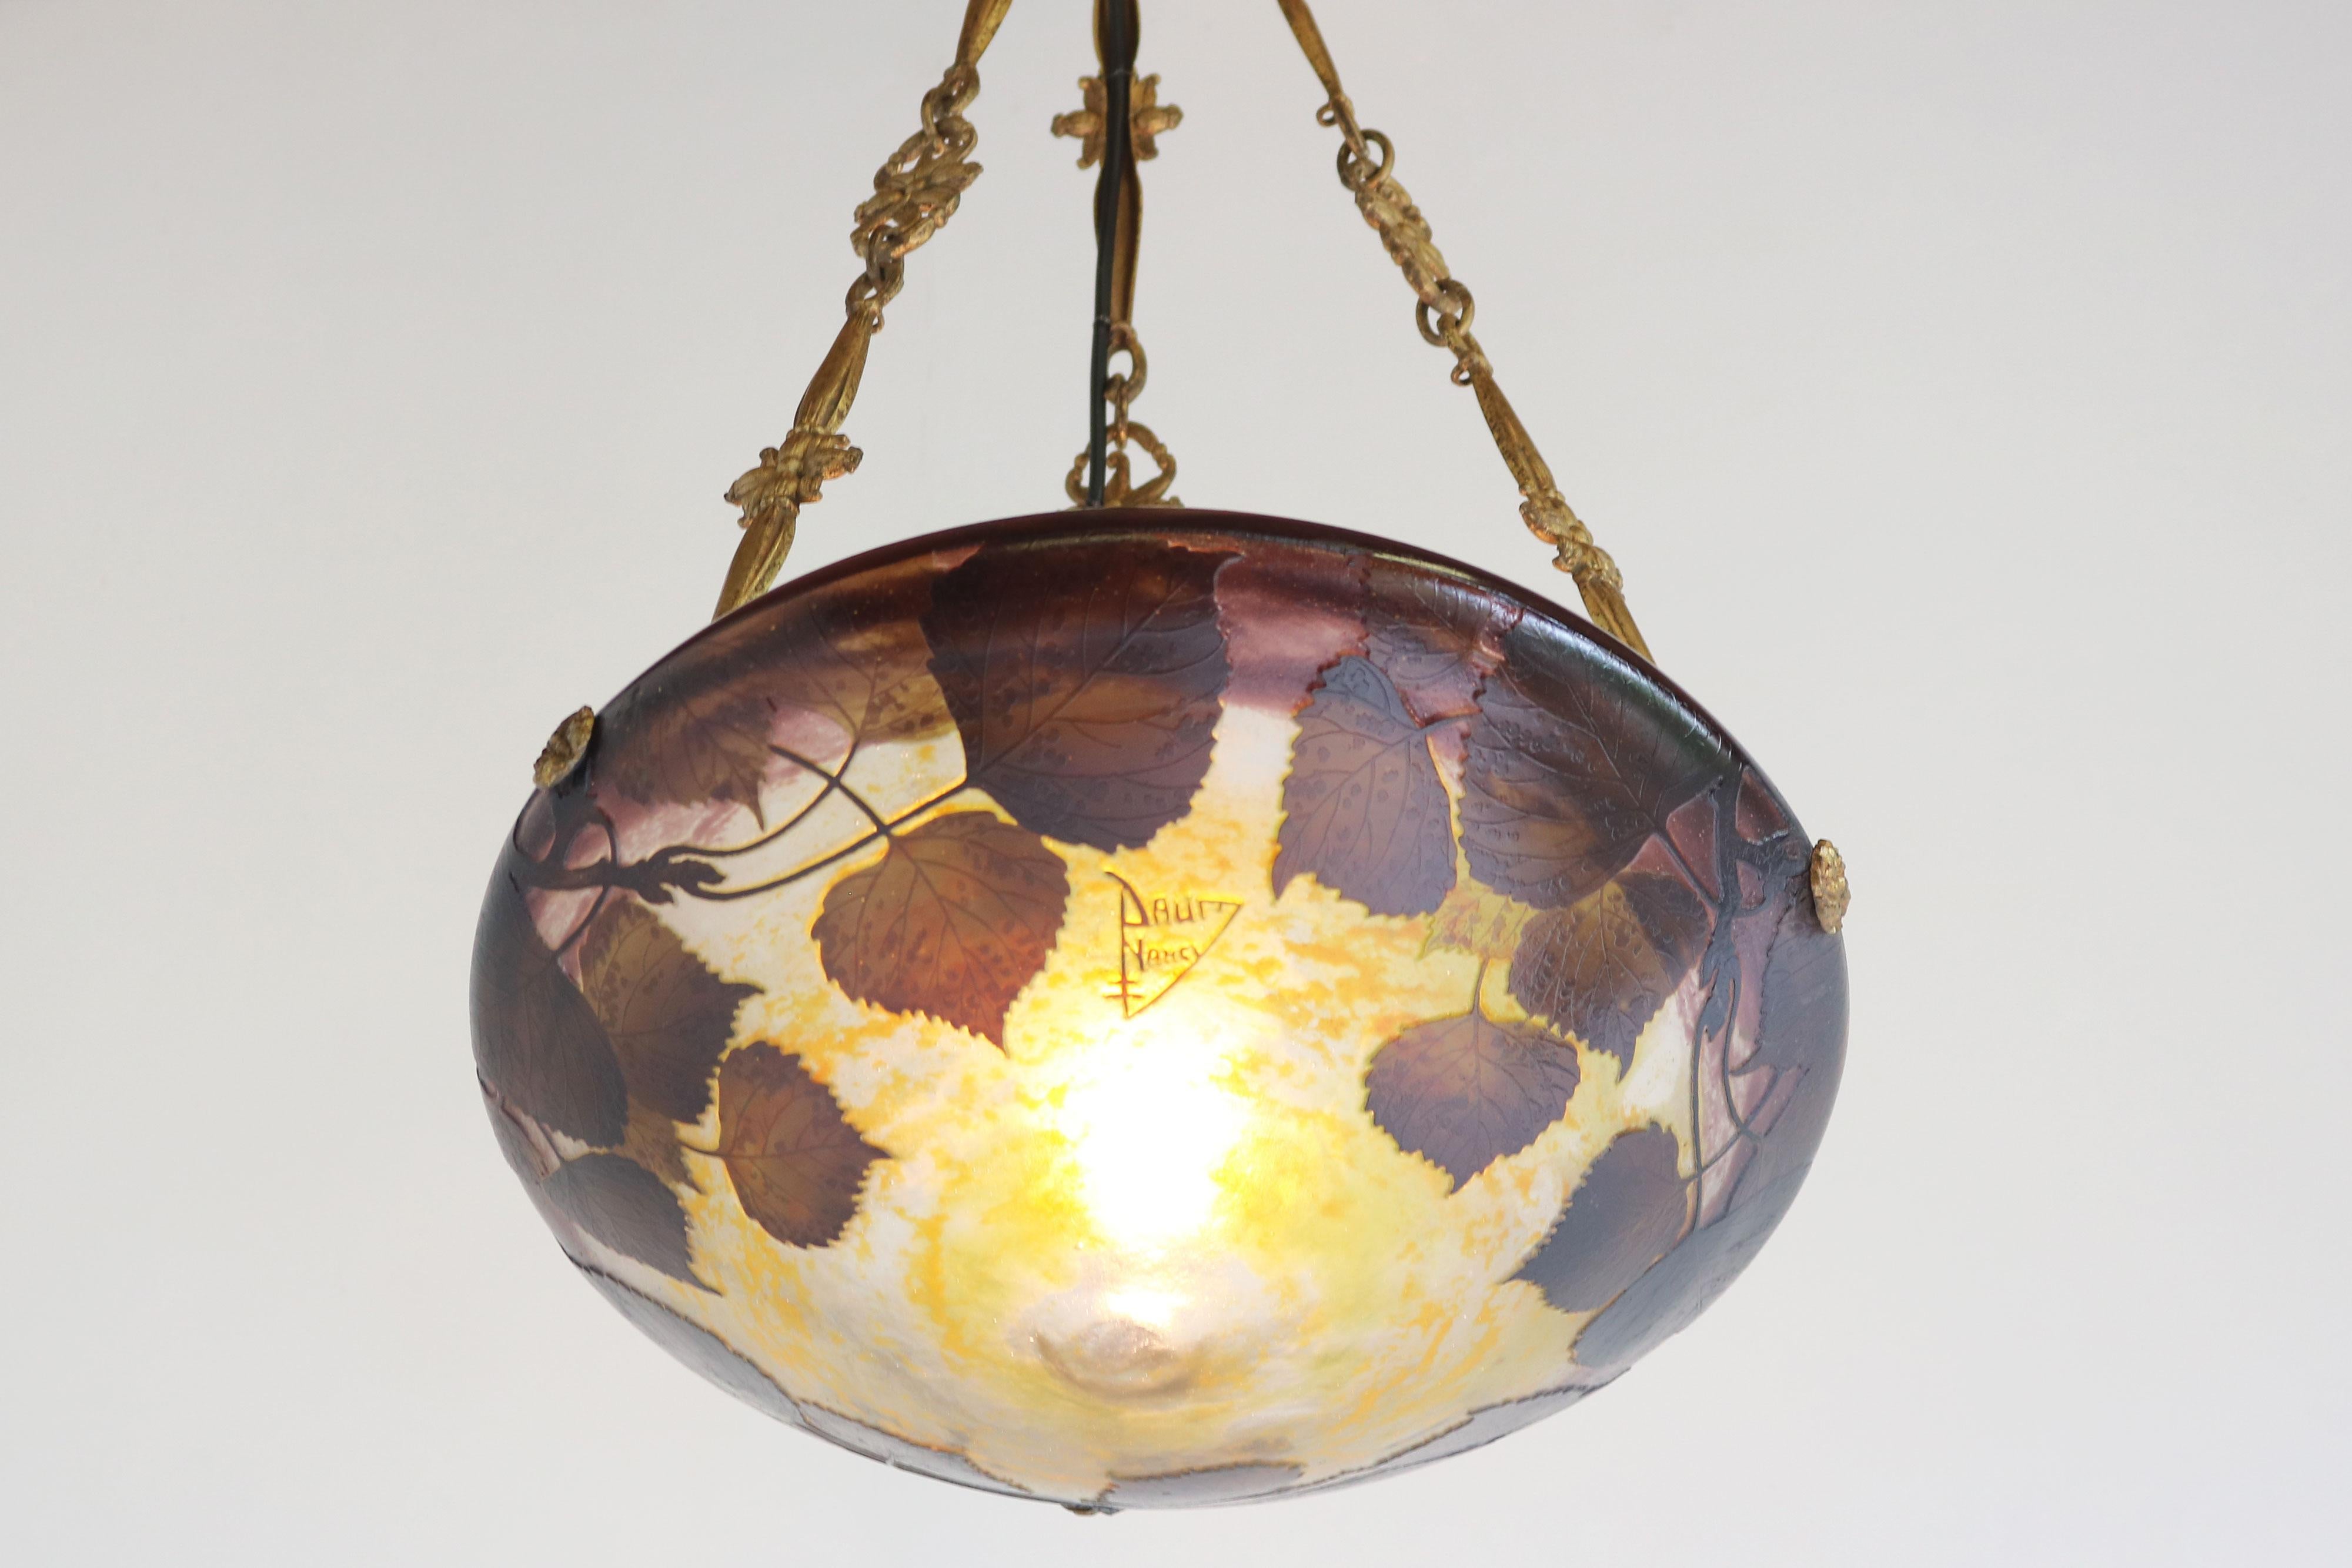 Embrace the beauty of the Art Nouveau era with this exquisite DAUM Nancy chandelier! 
Crafted in 1910 and signed with the ''Daum Nancy cross the Lorraine'' signature, this stunning piece features delicately etched poplar leaves in rich shades of